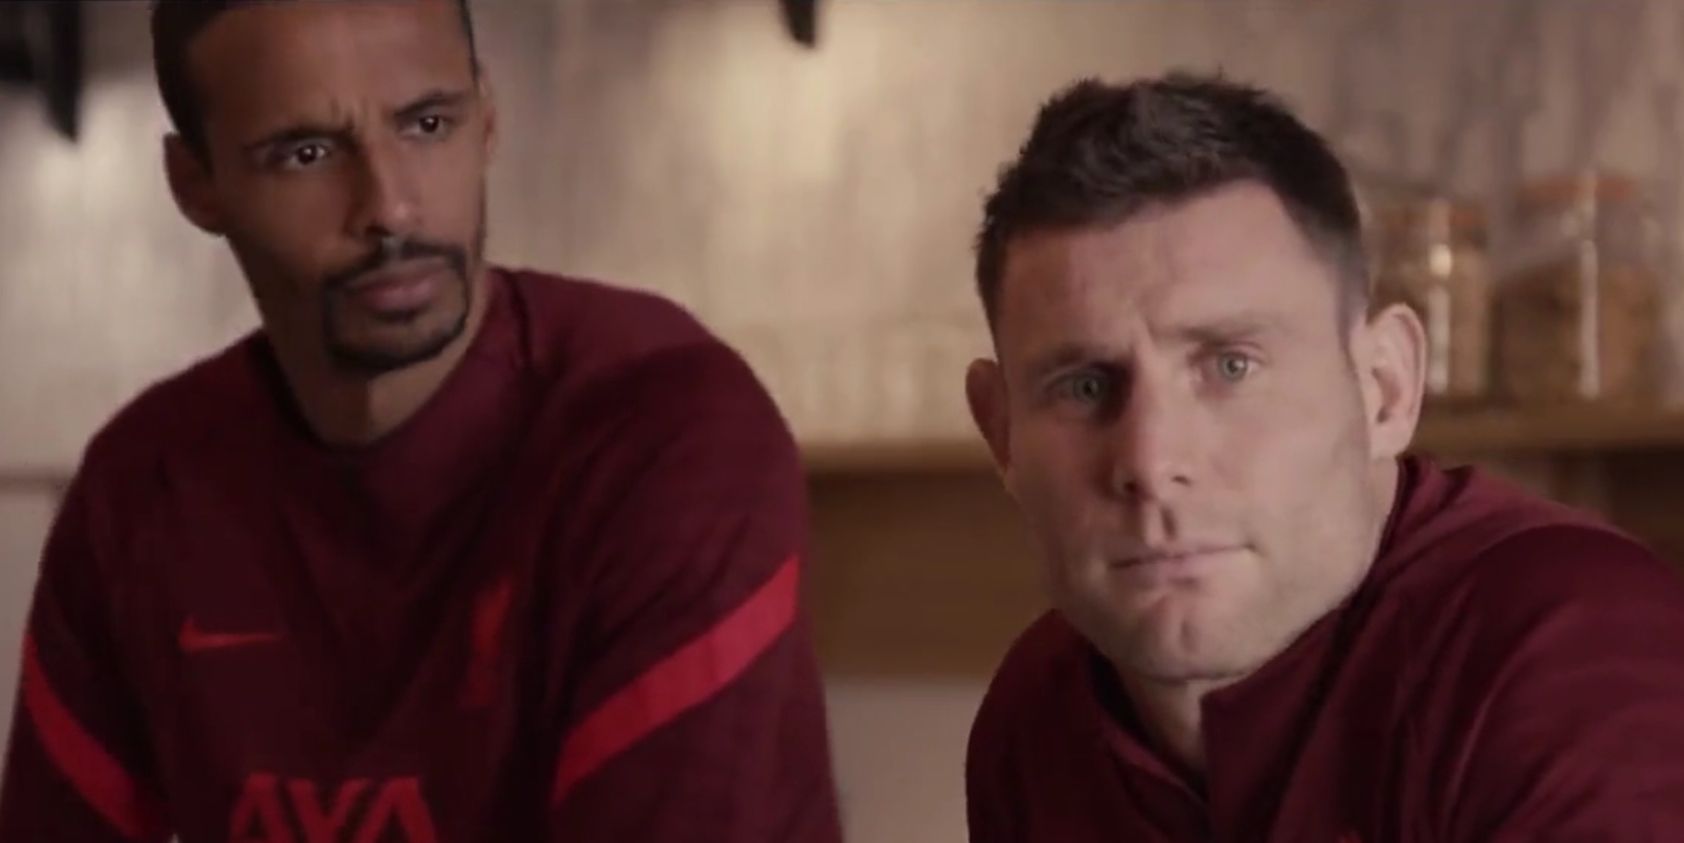 (Video) Joel Matip and James Milner star alongside each other in hilarious advert for the club